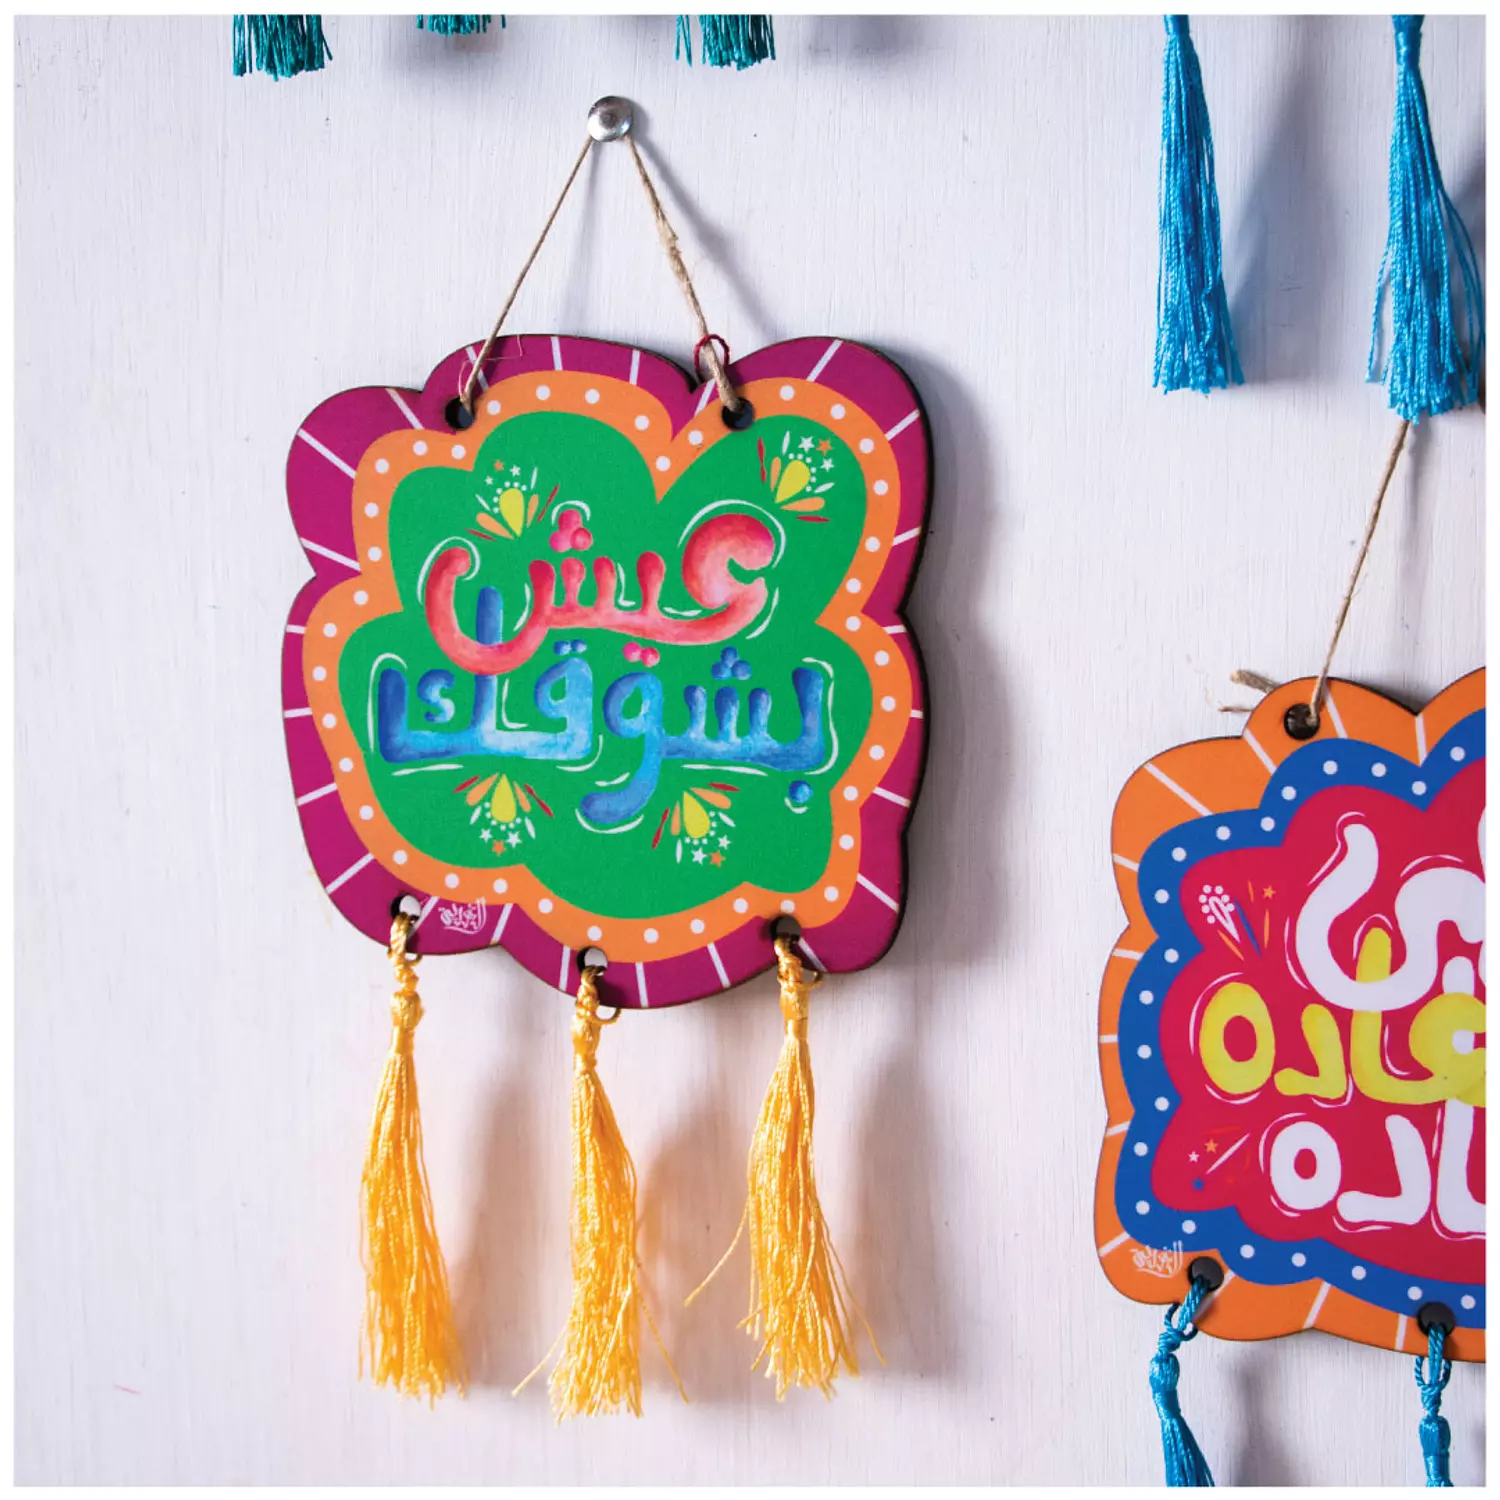 Arabic Calligraphy wall signs 4